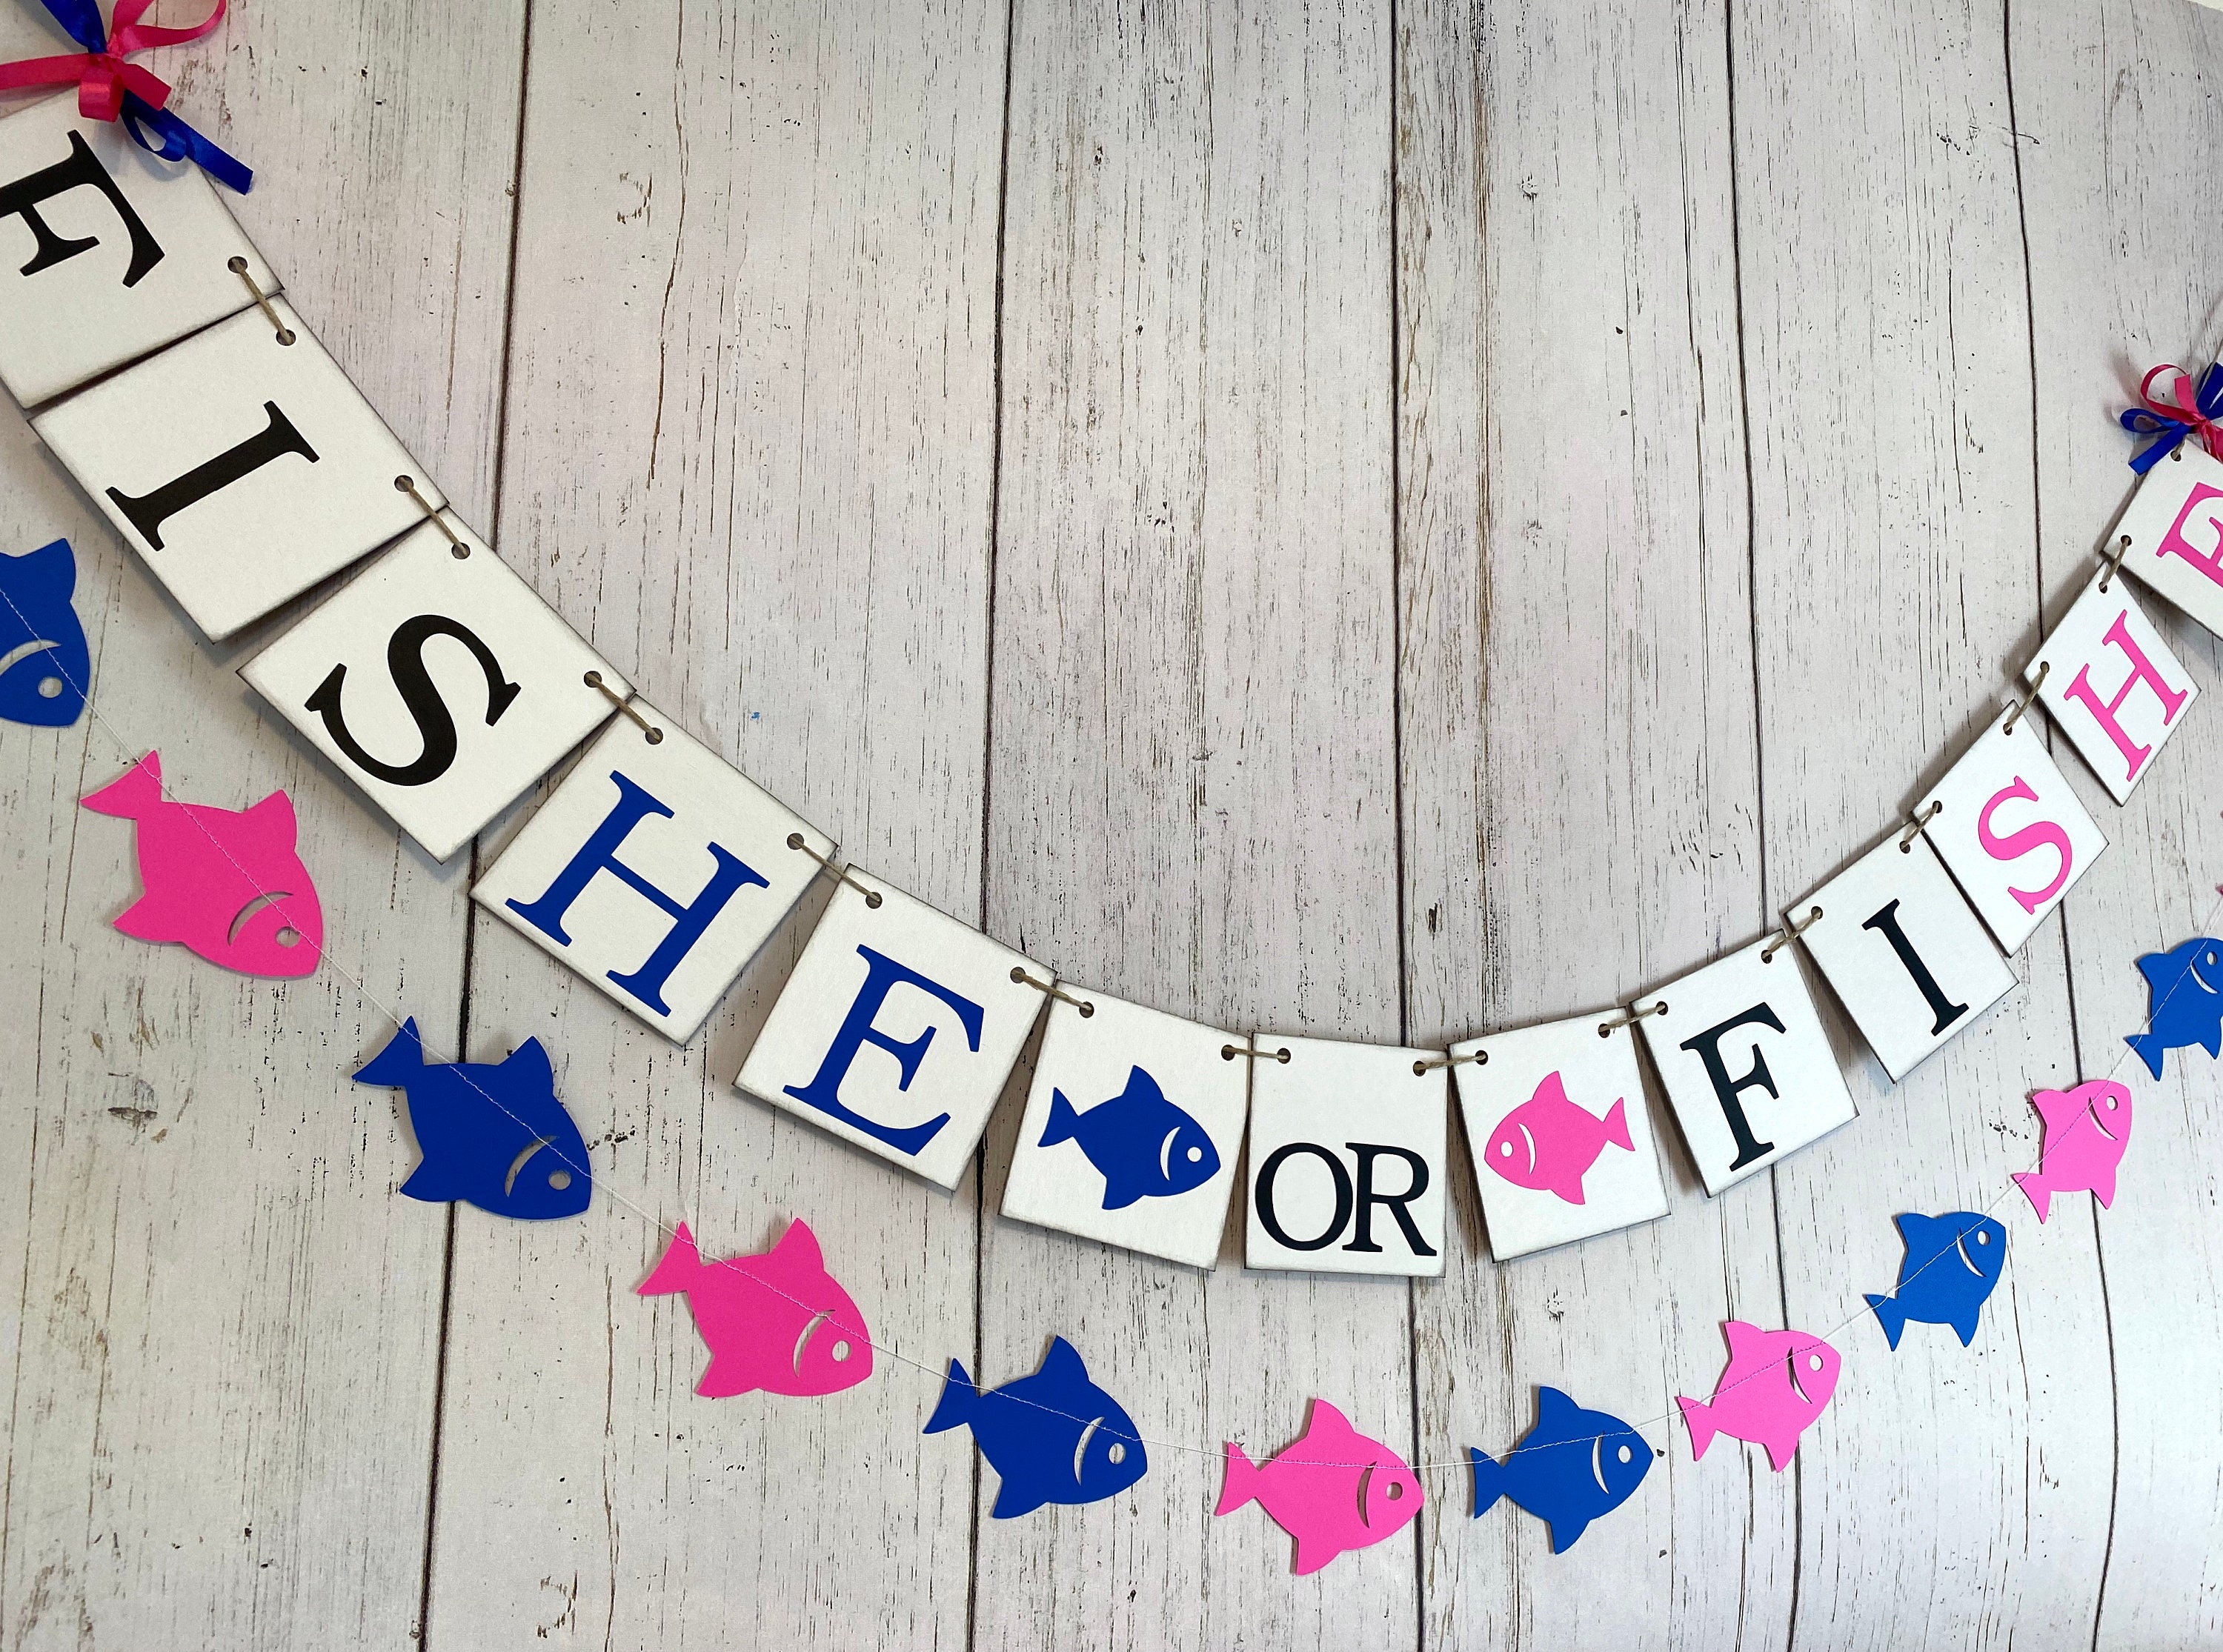 Fishing Baby Gender Reveal Party -Team Fish-he or Fish-She Stickers